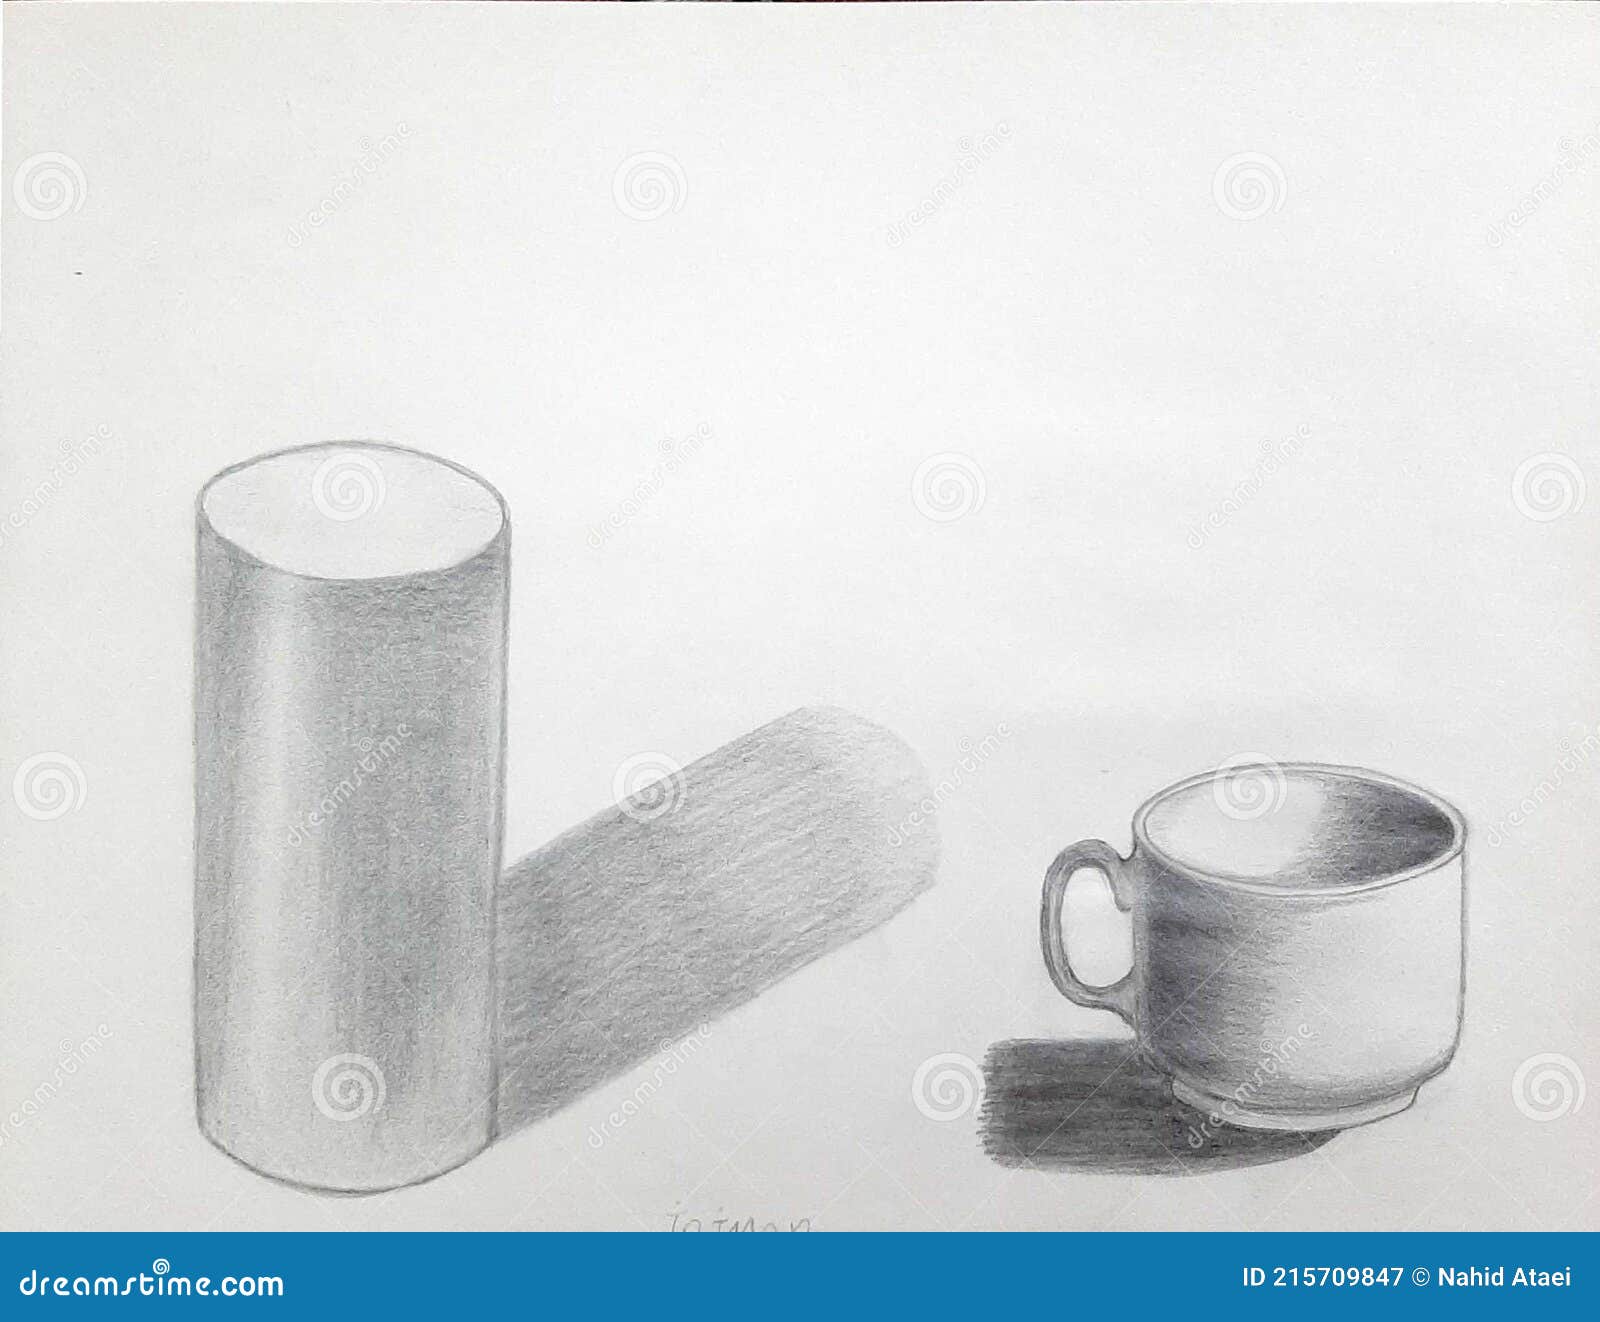 Learn How to Draw a Cup with Saucer (Everyday Objects) Step by Step :  Drawing Tutorials